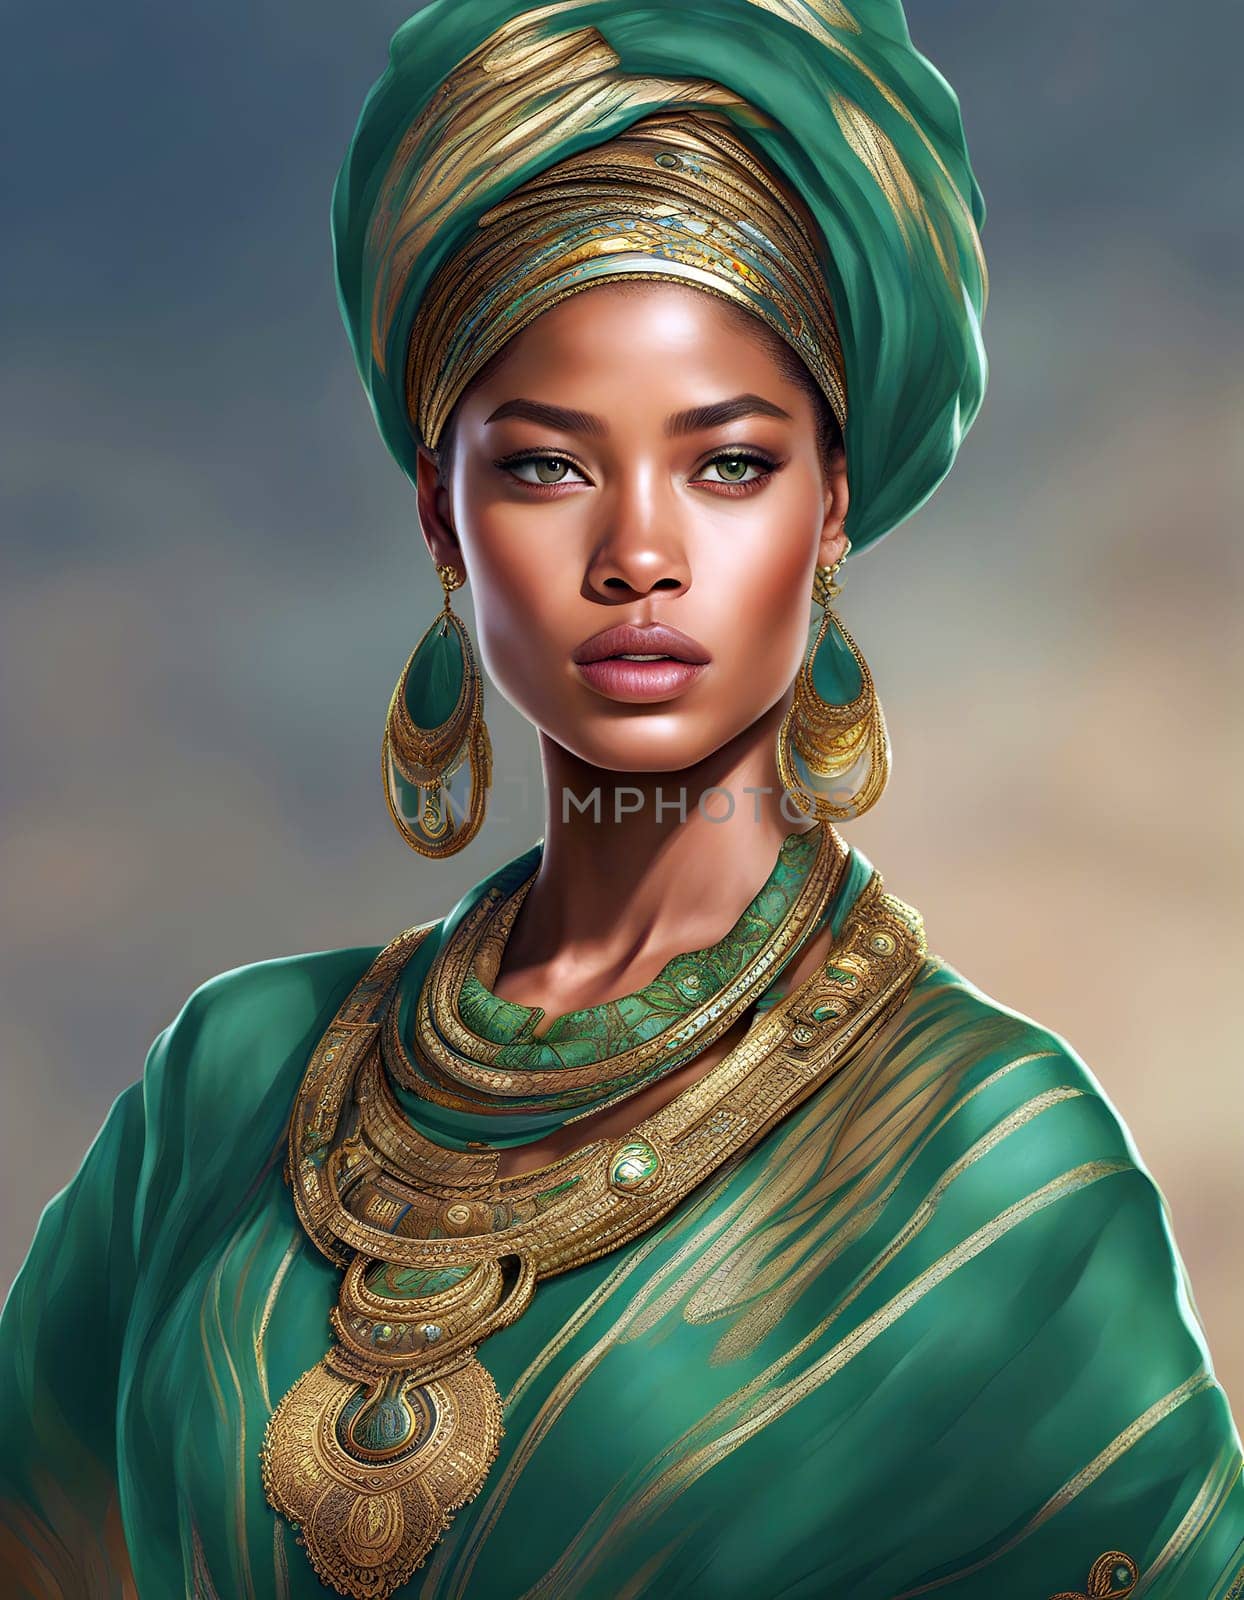 Elegant Woman in Traditional Turban and Gold Jewelry by rostik924